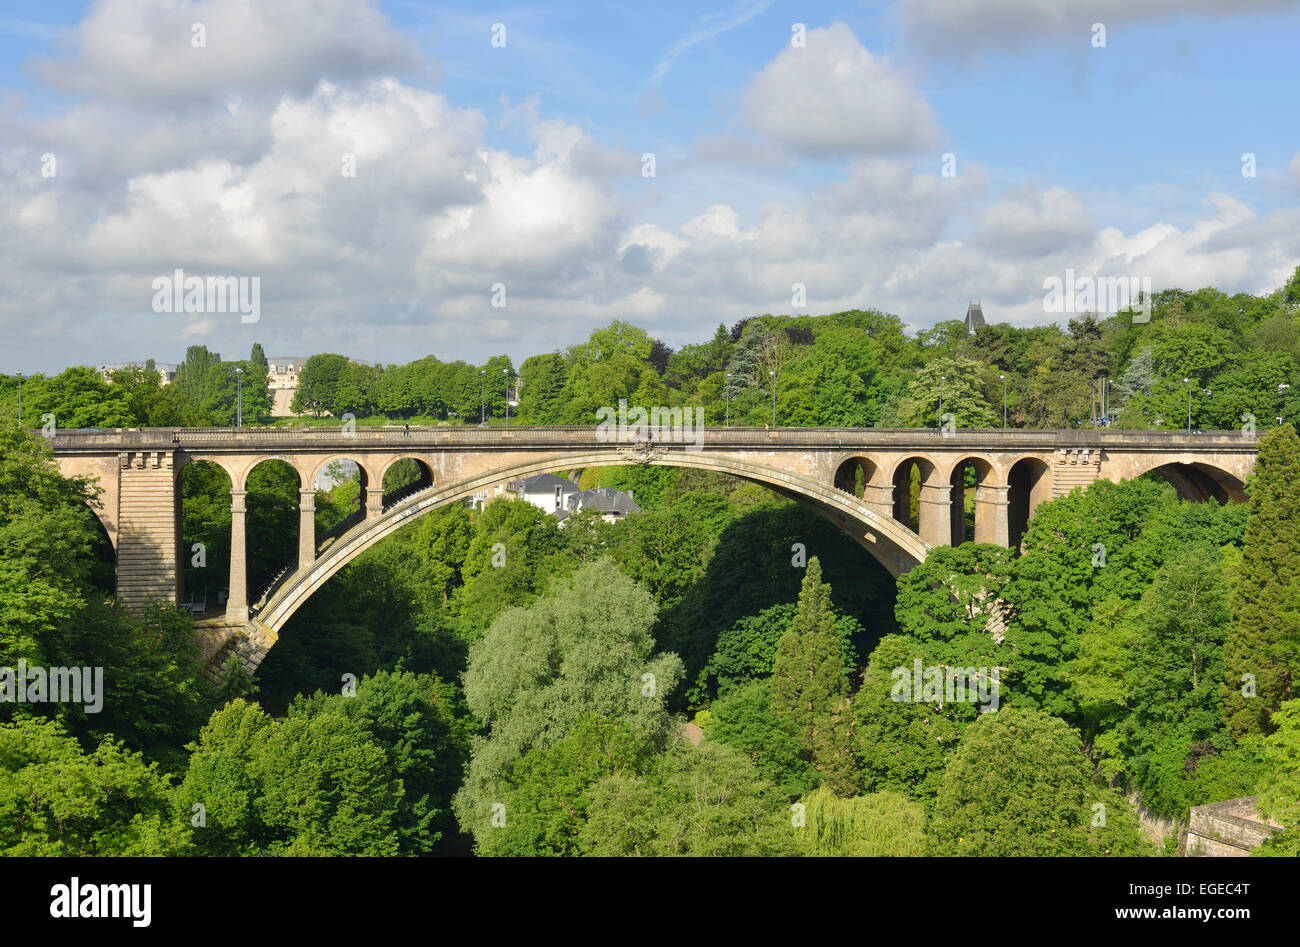 Adolphe bridge spanning the Petrusse valley, Luxembourg City, Luxembourg Stock Photo